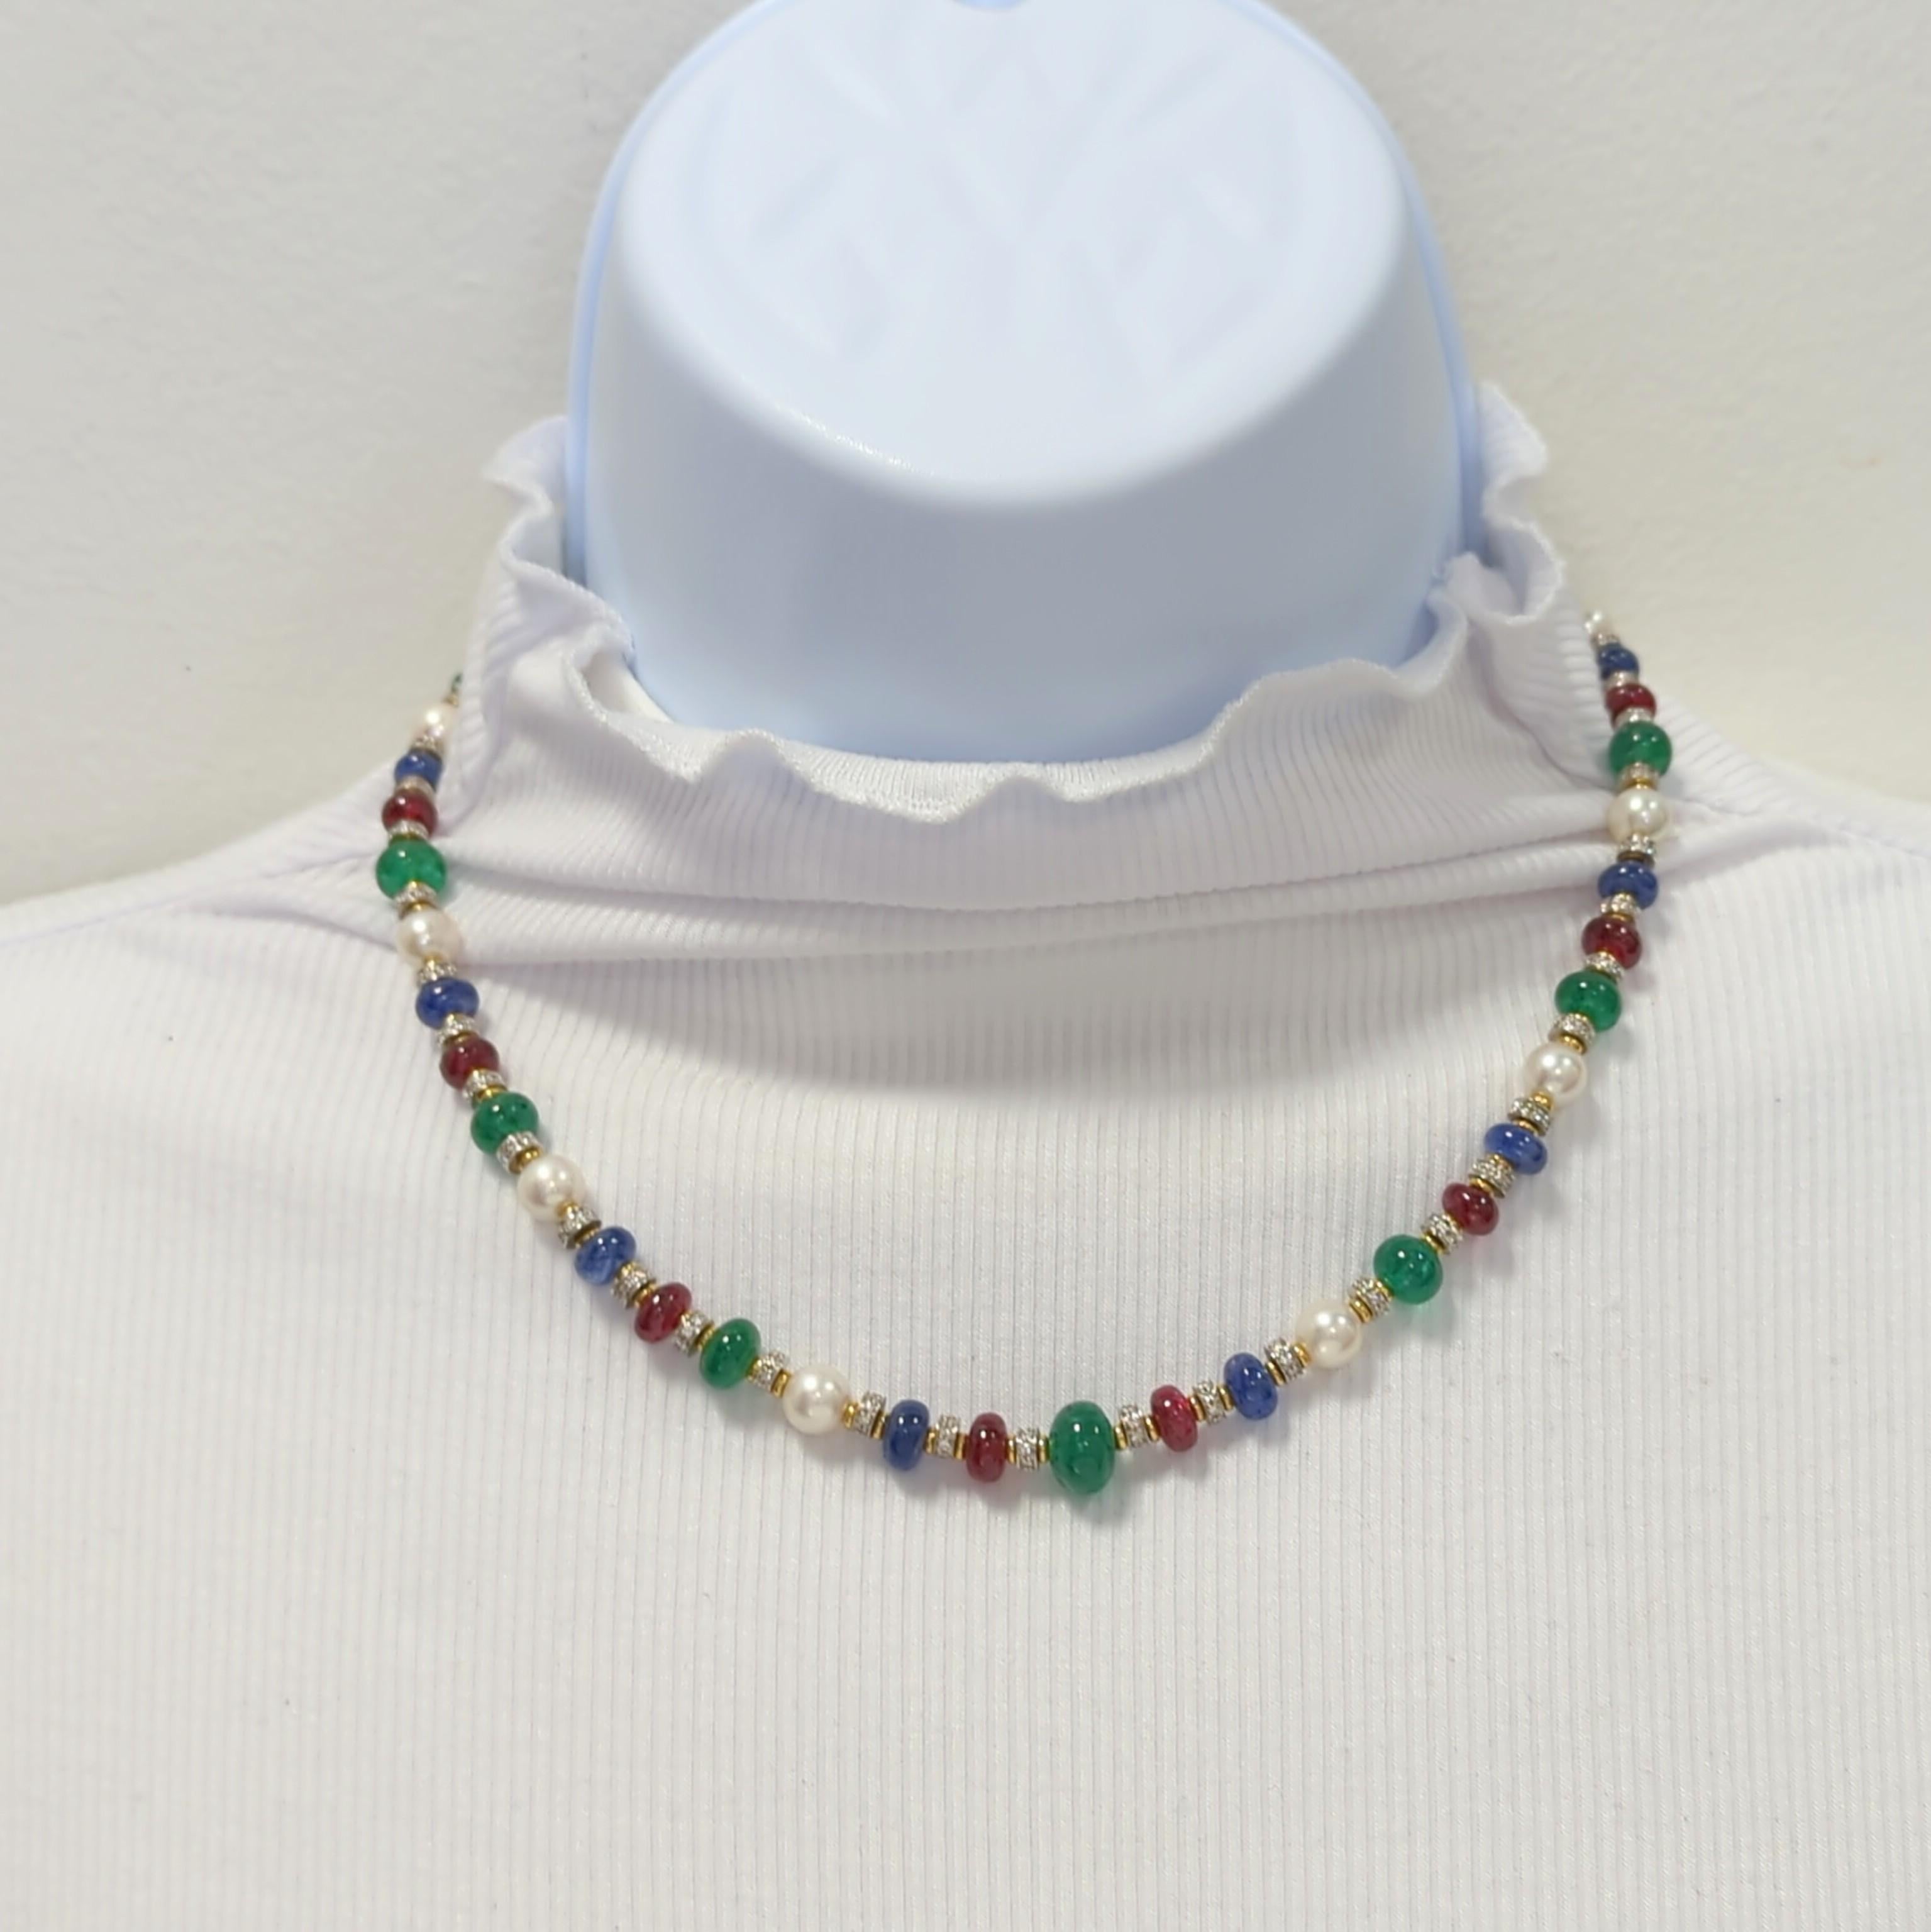 Gorgeous emerald, ruby, and blue sapphire beads with white pearls and white diamond rounds.  Handmade in 18k white and yellow gold.  Length is 17.25